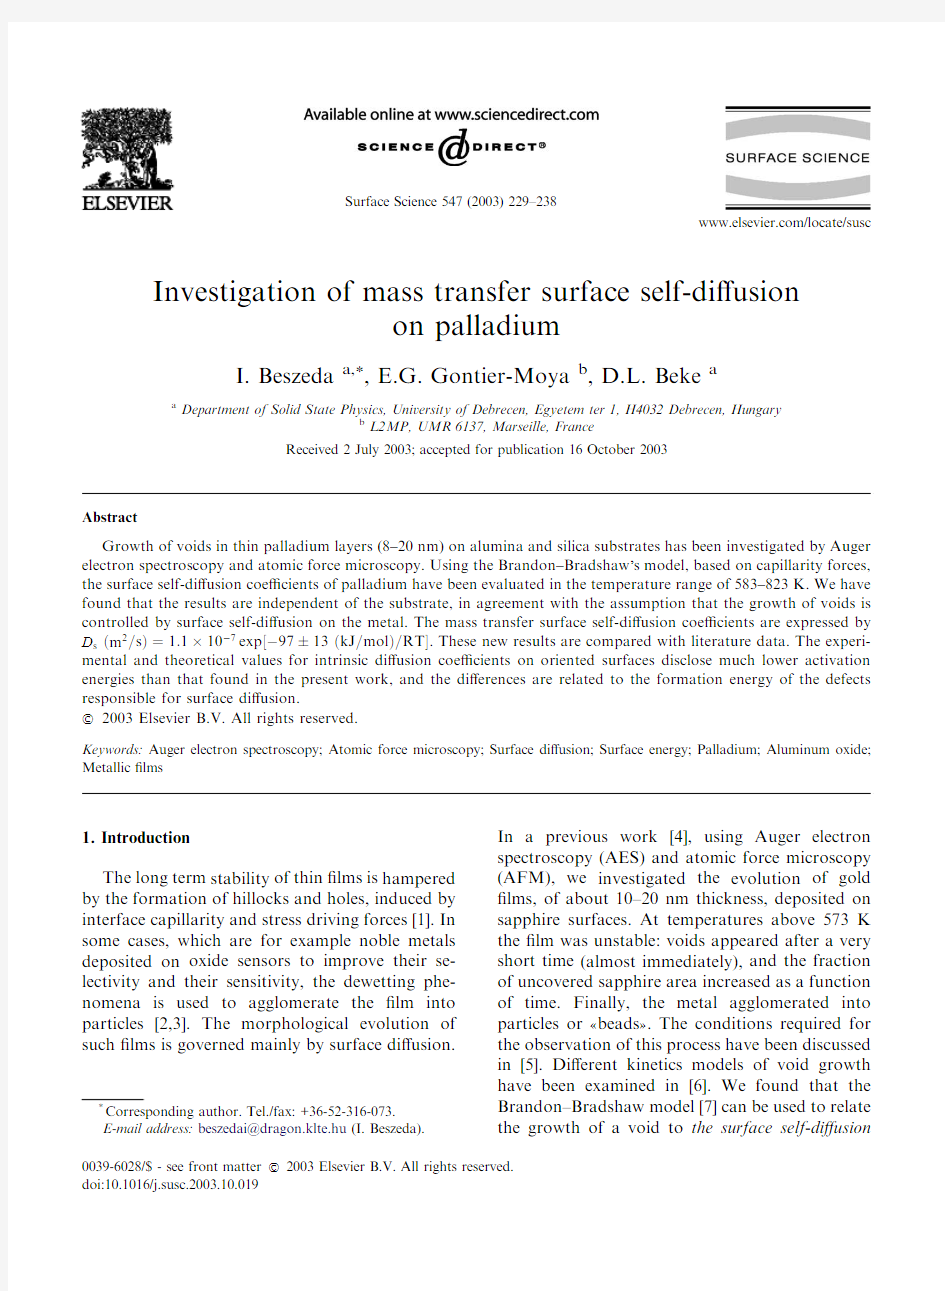 Investigation-of-mass-transfer-surface-self-diffusion-on-palladium_2003_Surface-Science